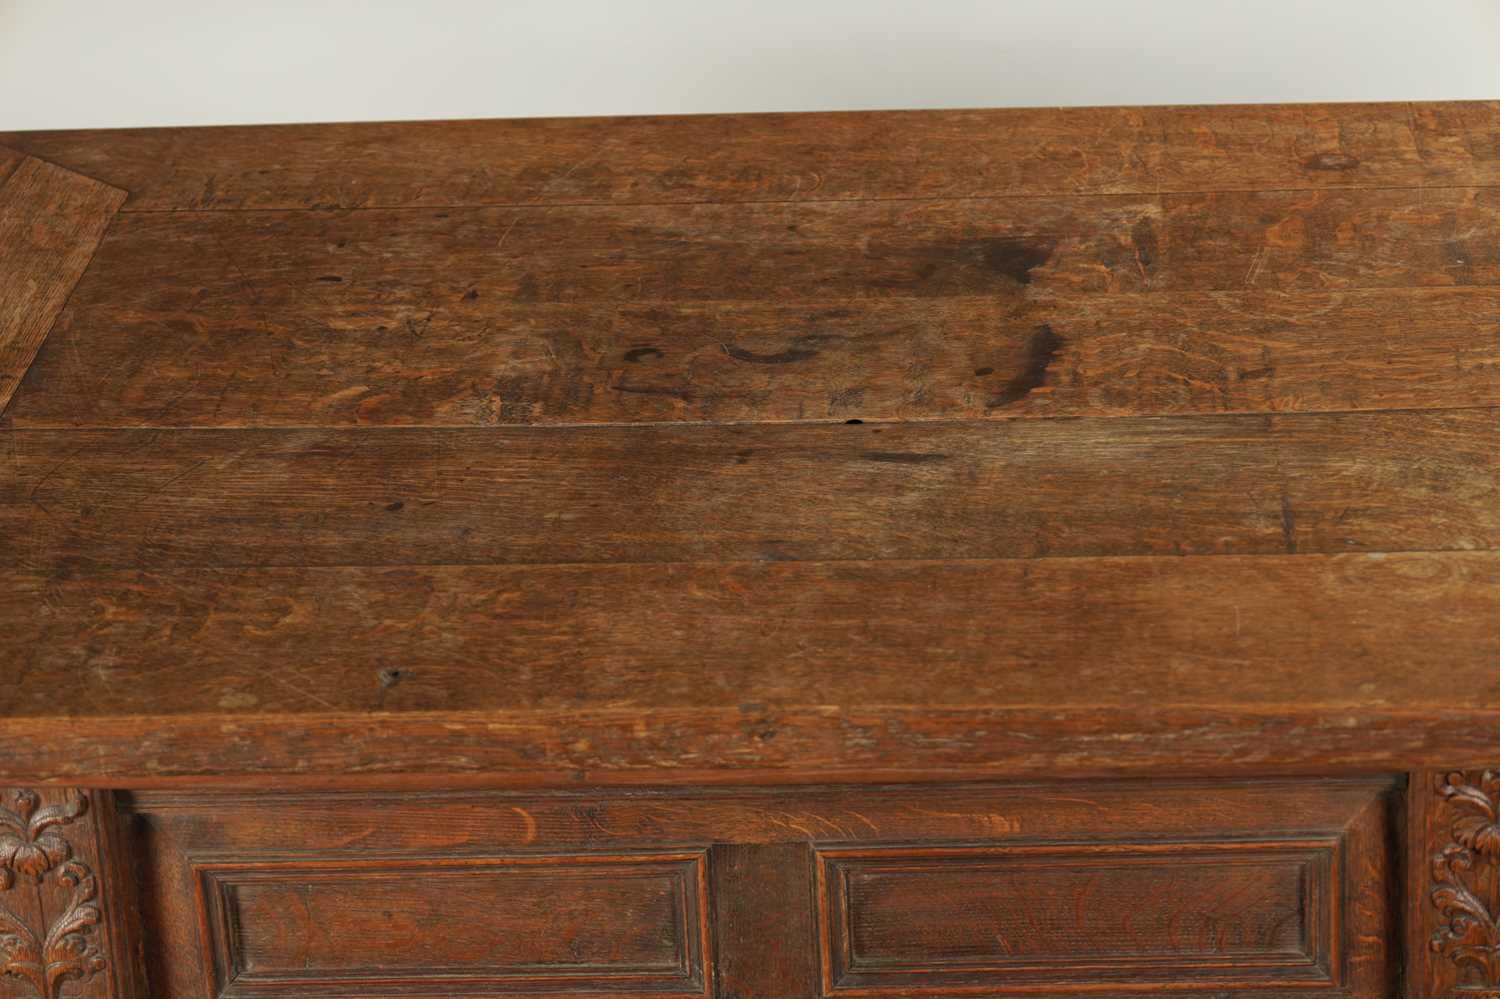 AN 18TH CENTURY FLEMISH OAK TABLE - Image 3 of 7